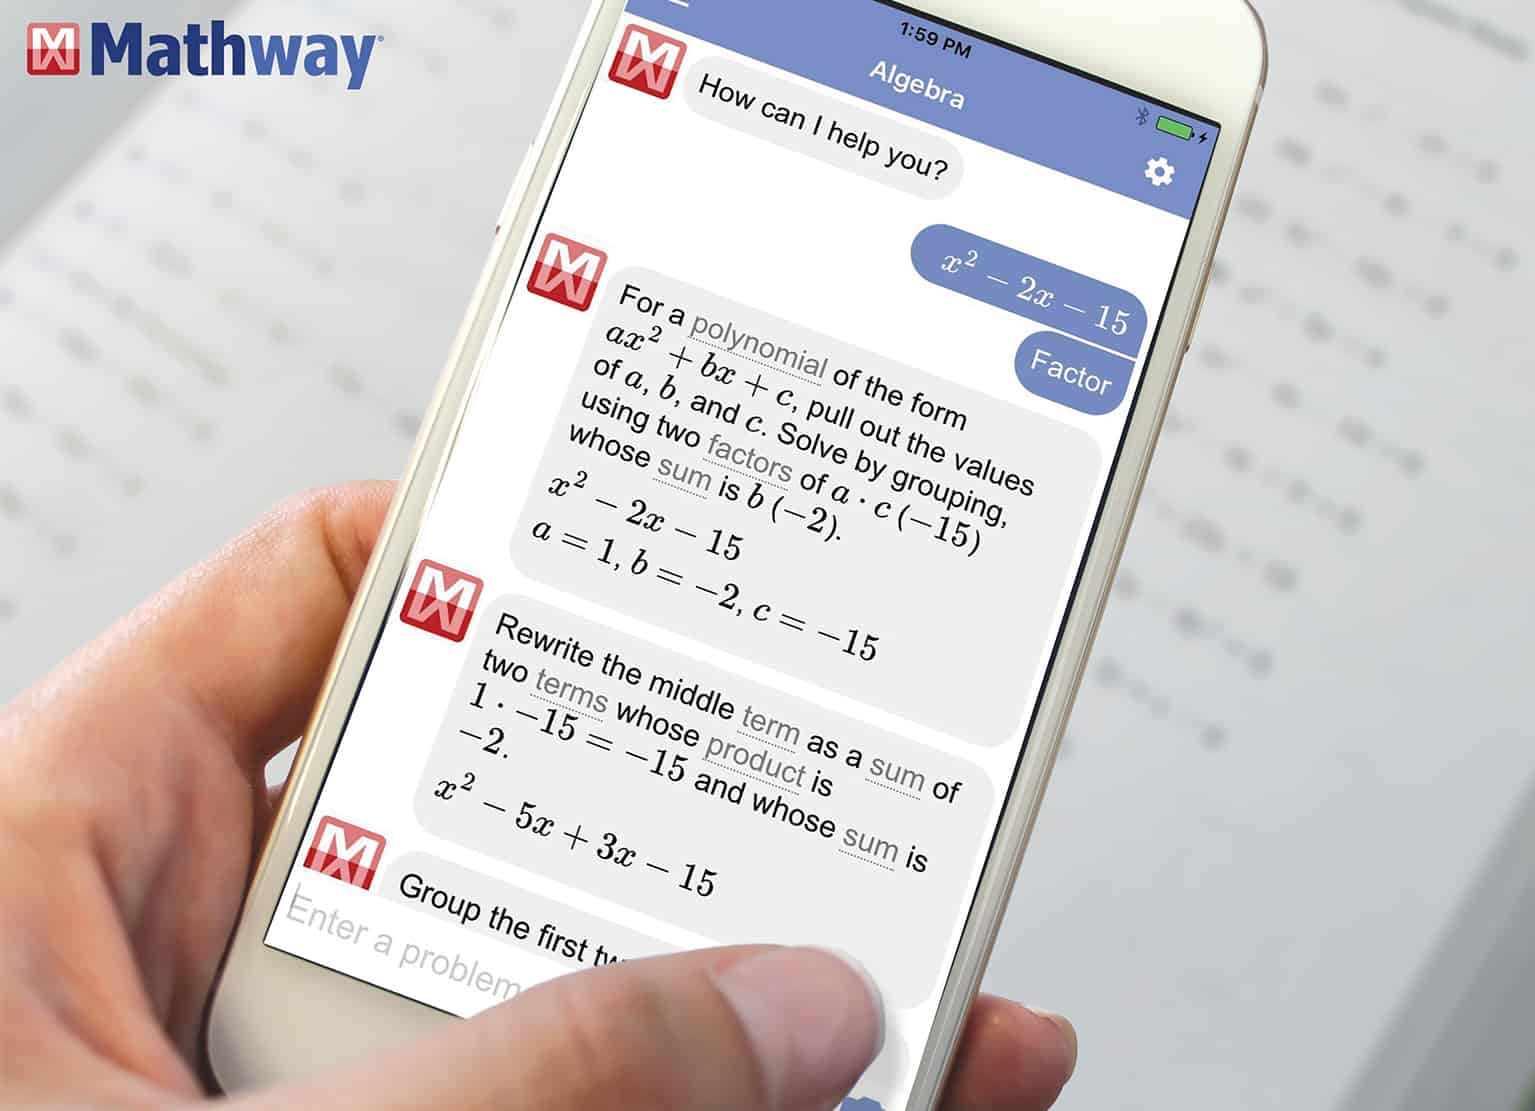 Mathway math app - Learning site to help high schoolers with math